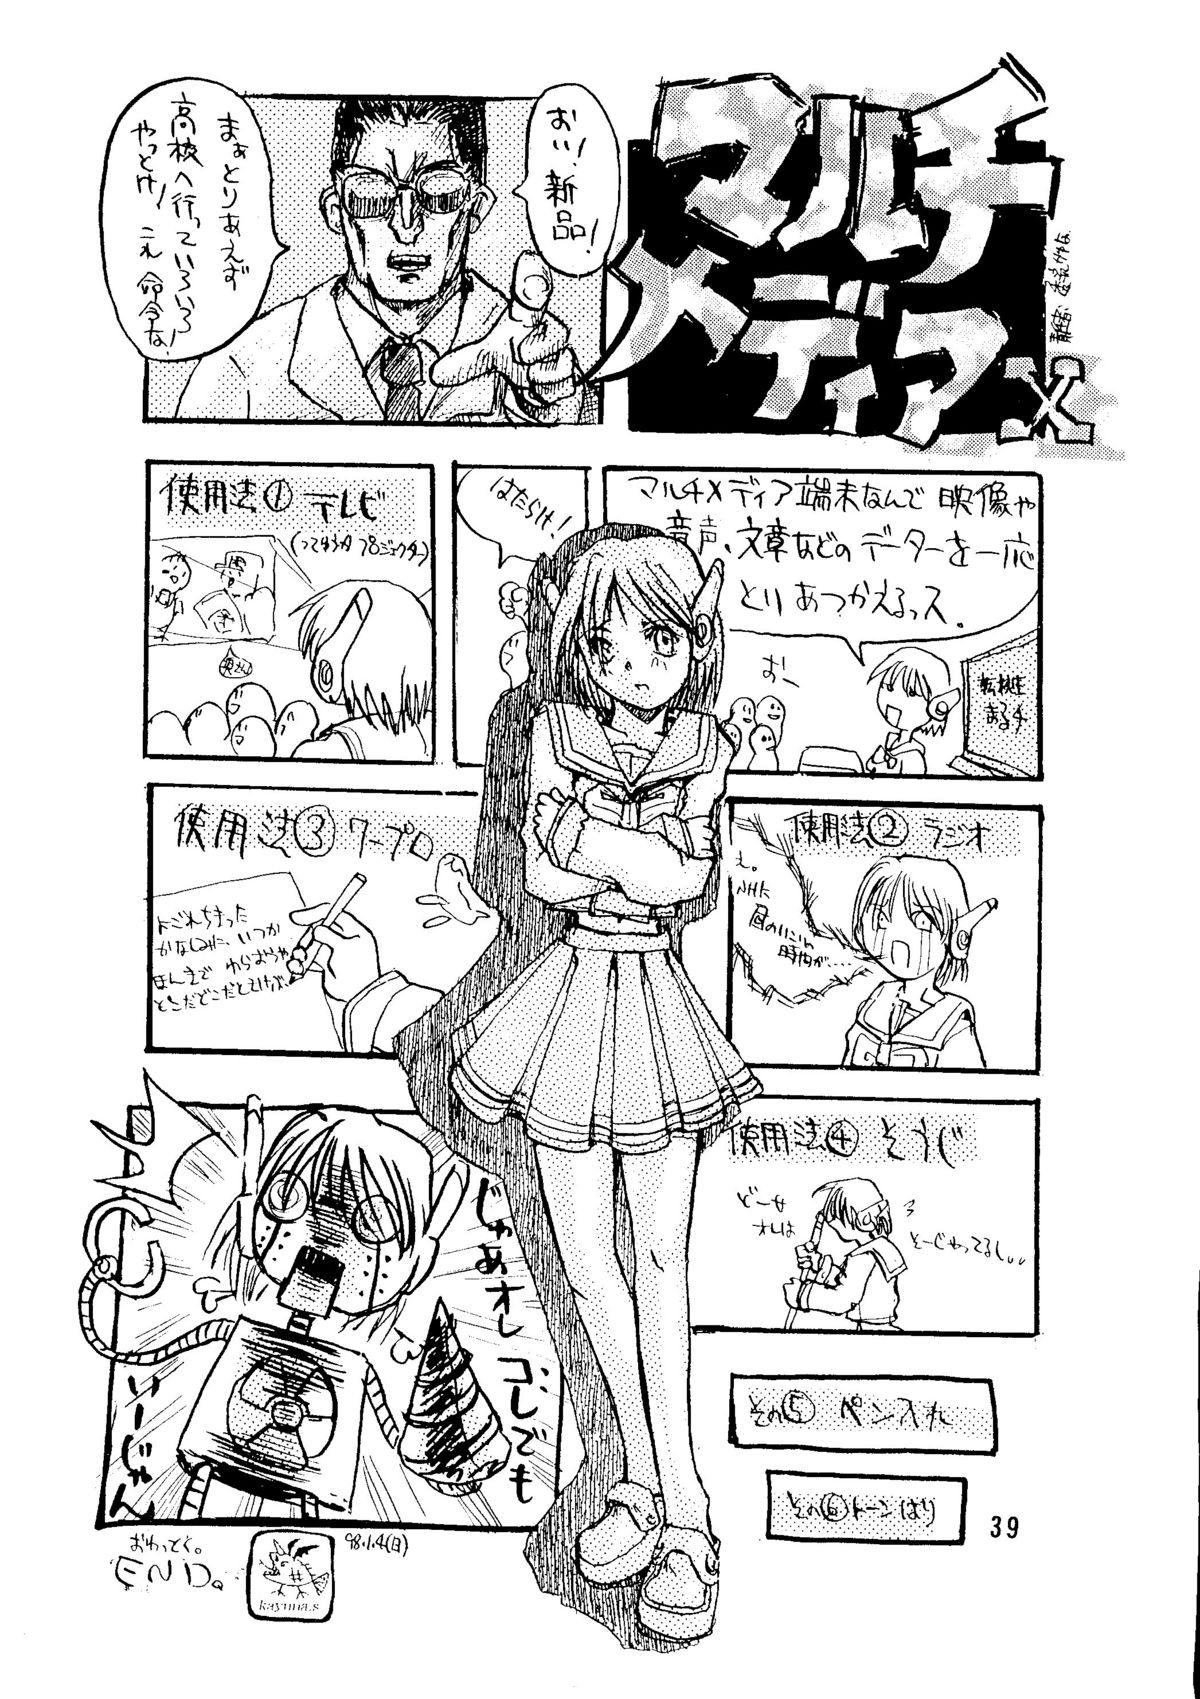 Cuminmouth Dandyism 4 (To Heart, Card Captor Sakura, White Album] - Cardcaptor sakura To heart White album Oral Sex - Page 41